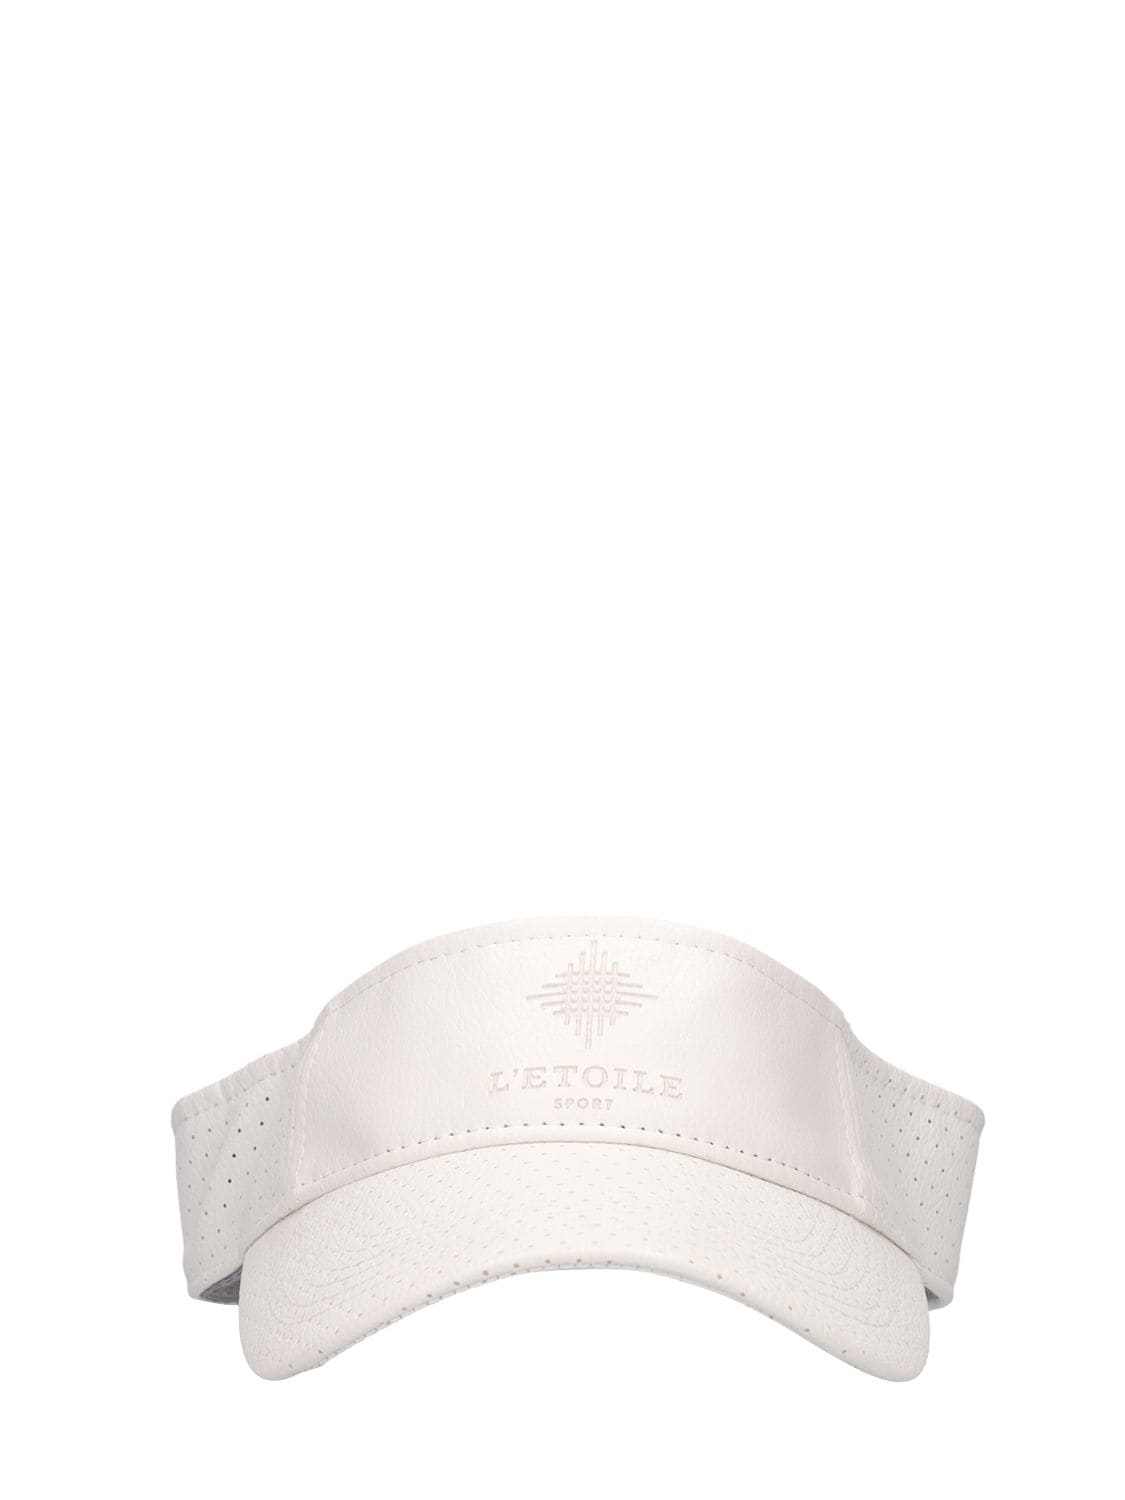 L'etoile Sport Perforated Leather Visor In White